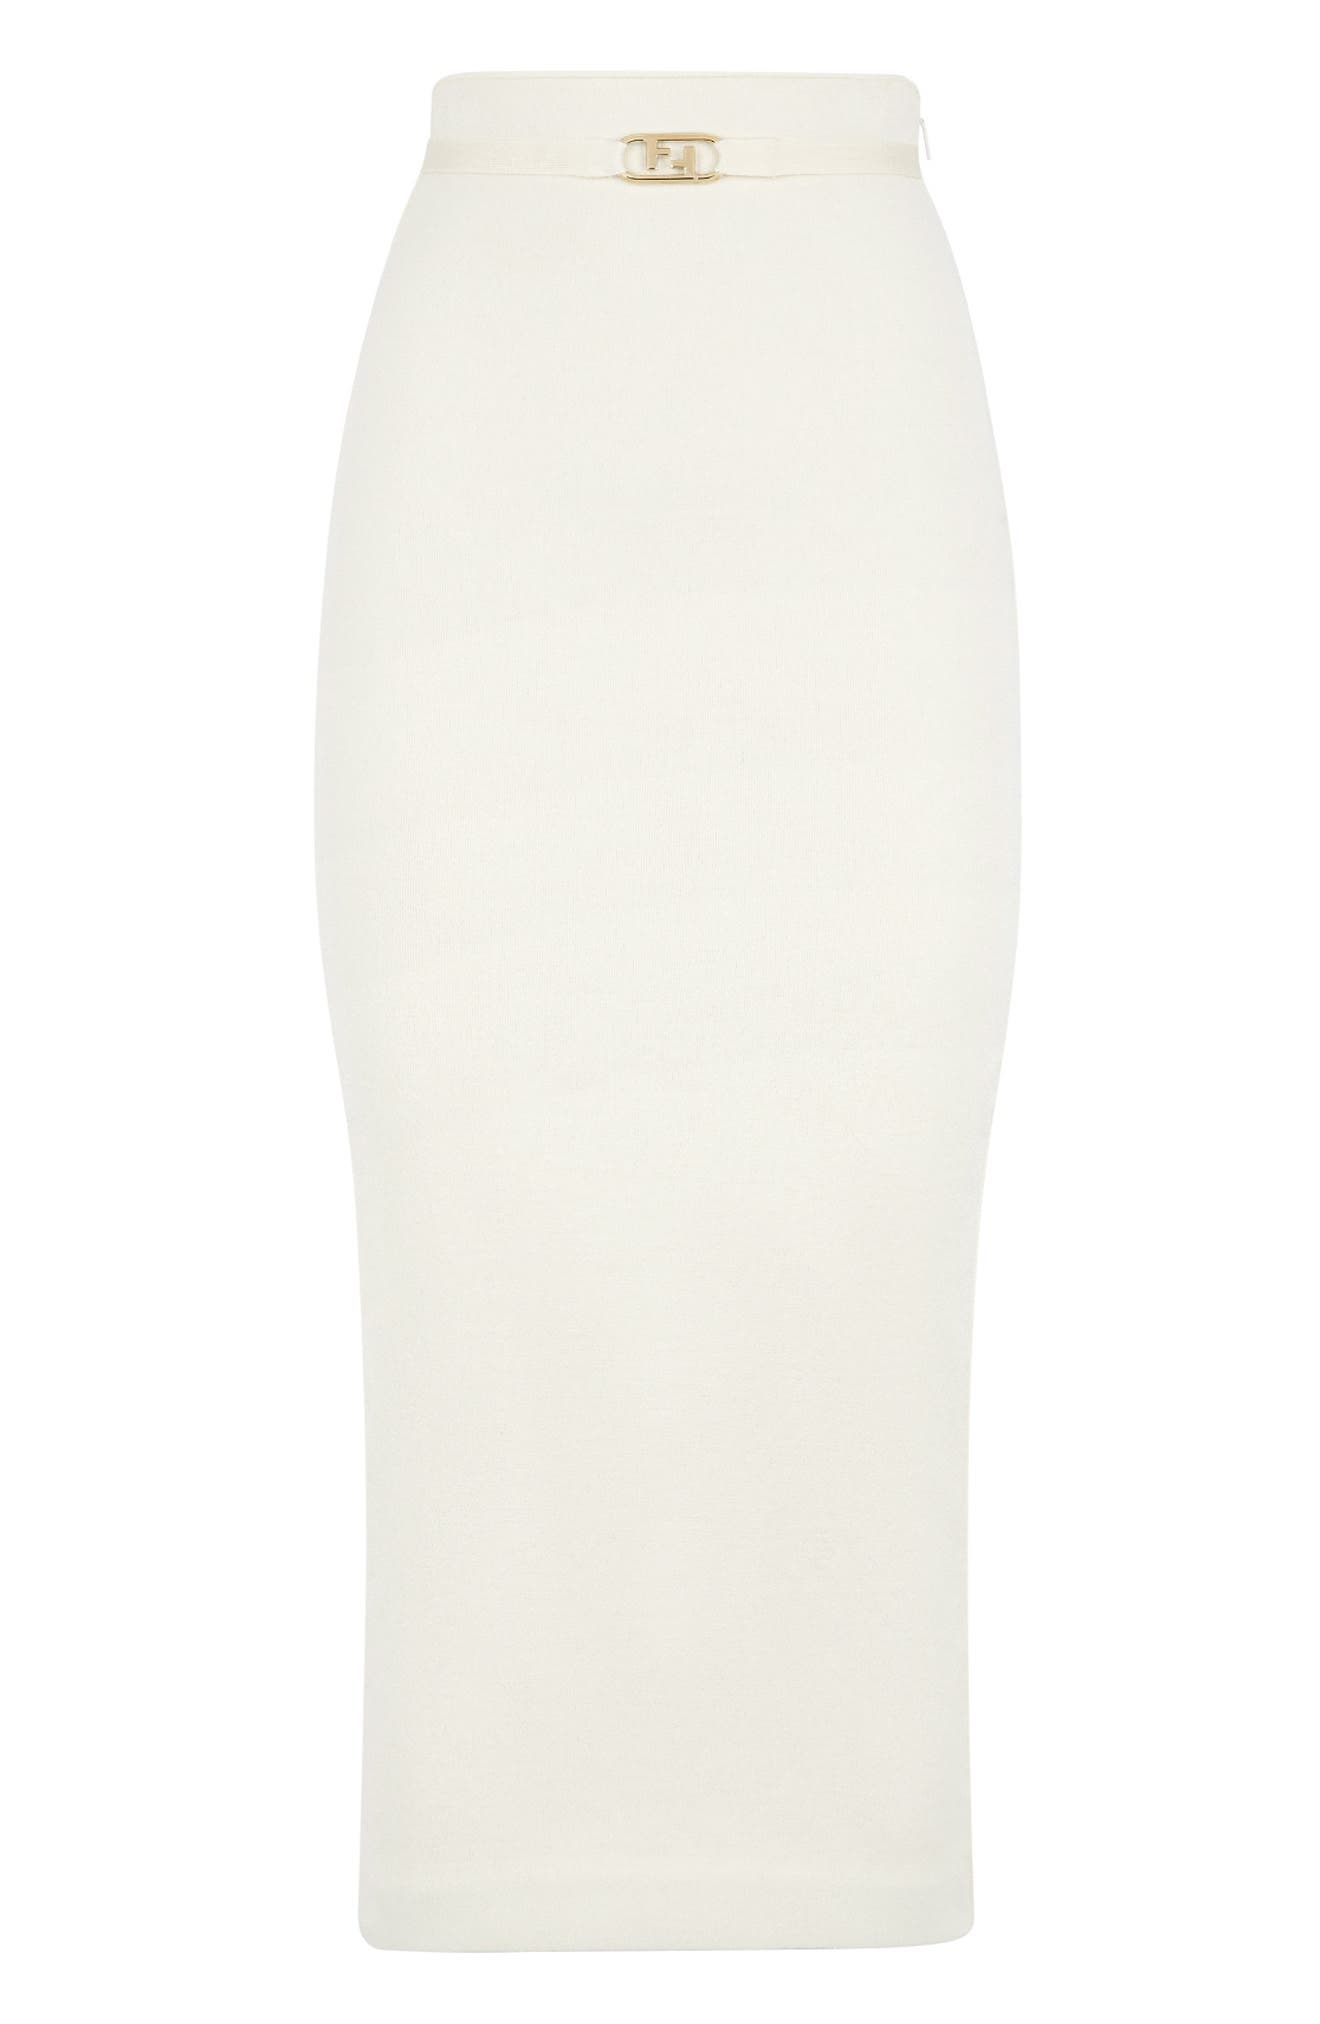 Fendi Belted Double Knit Pencil Skirt in Grace at Nordstrom, Size 6 Us